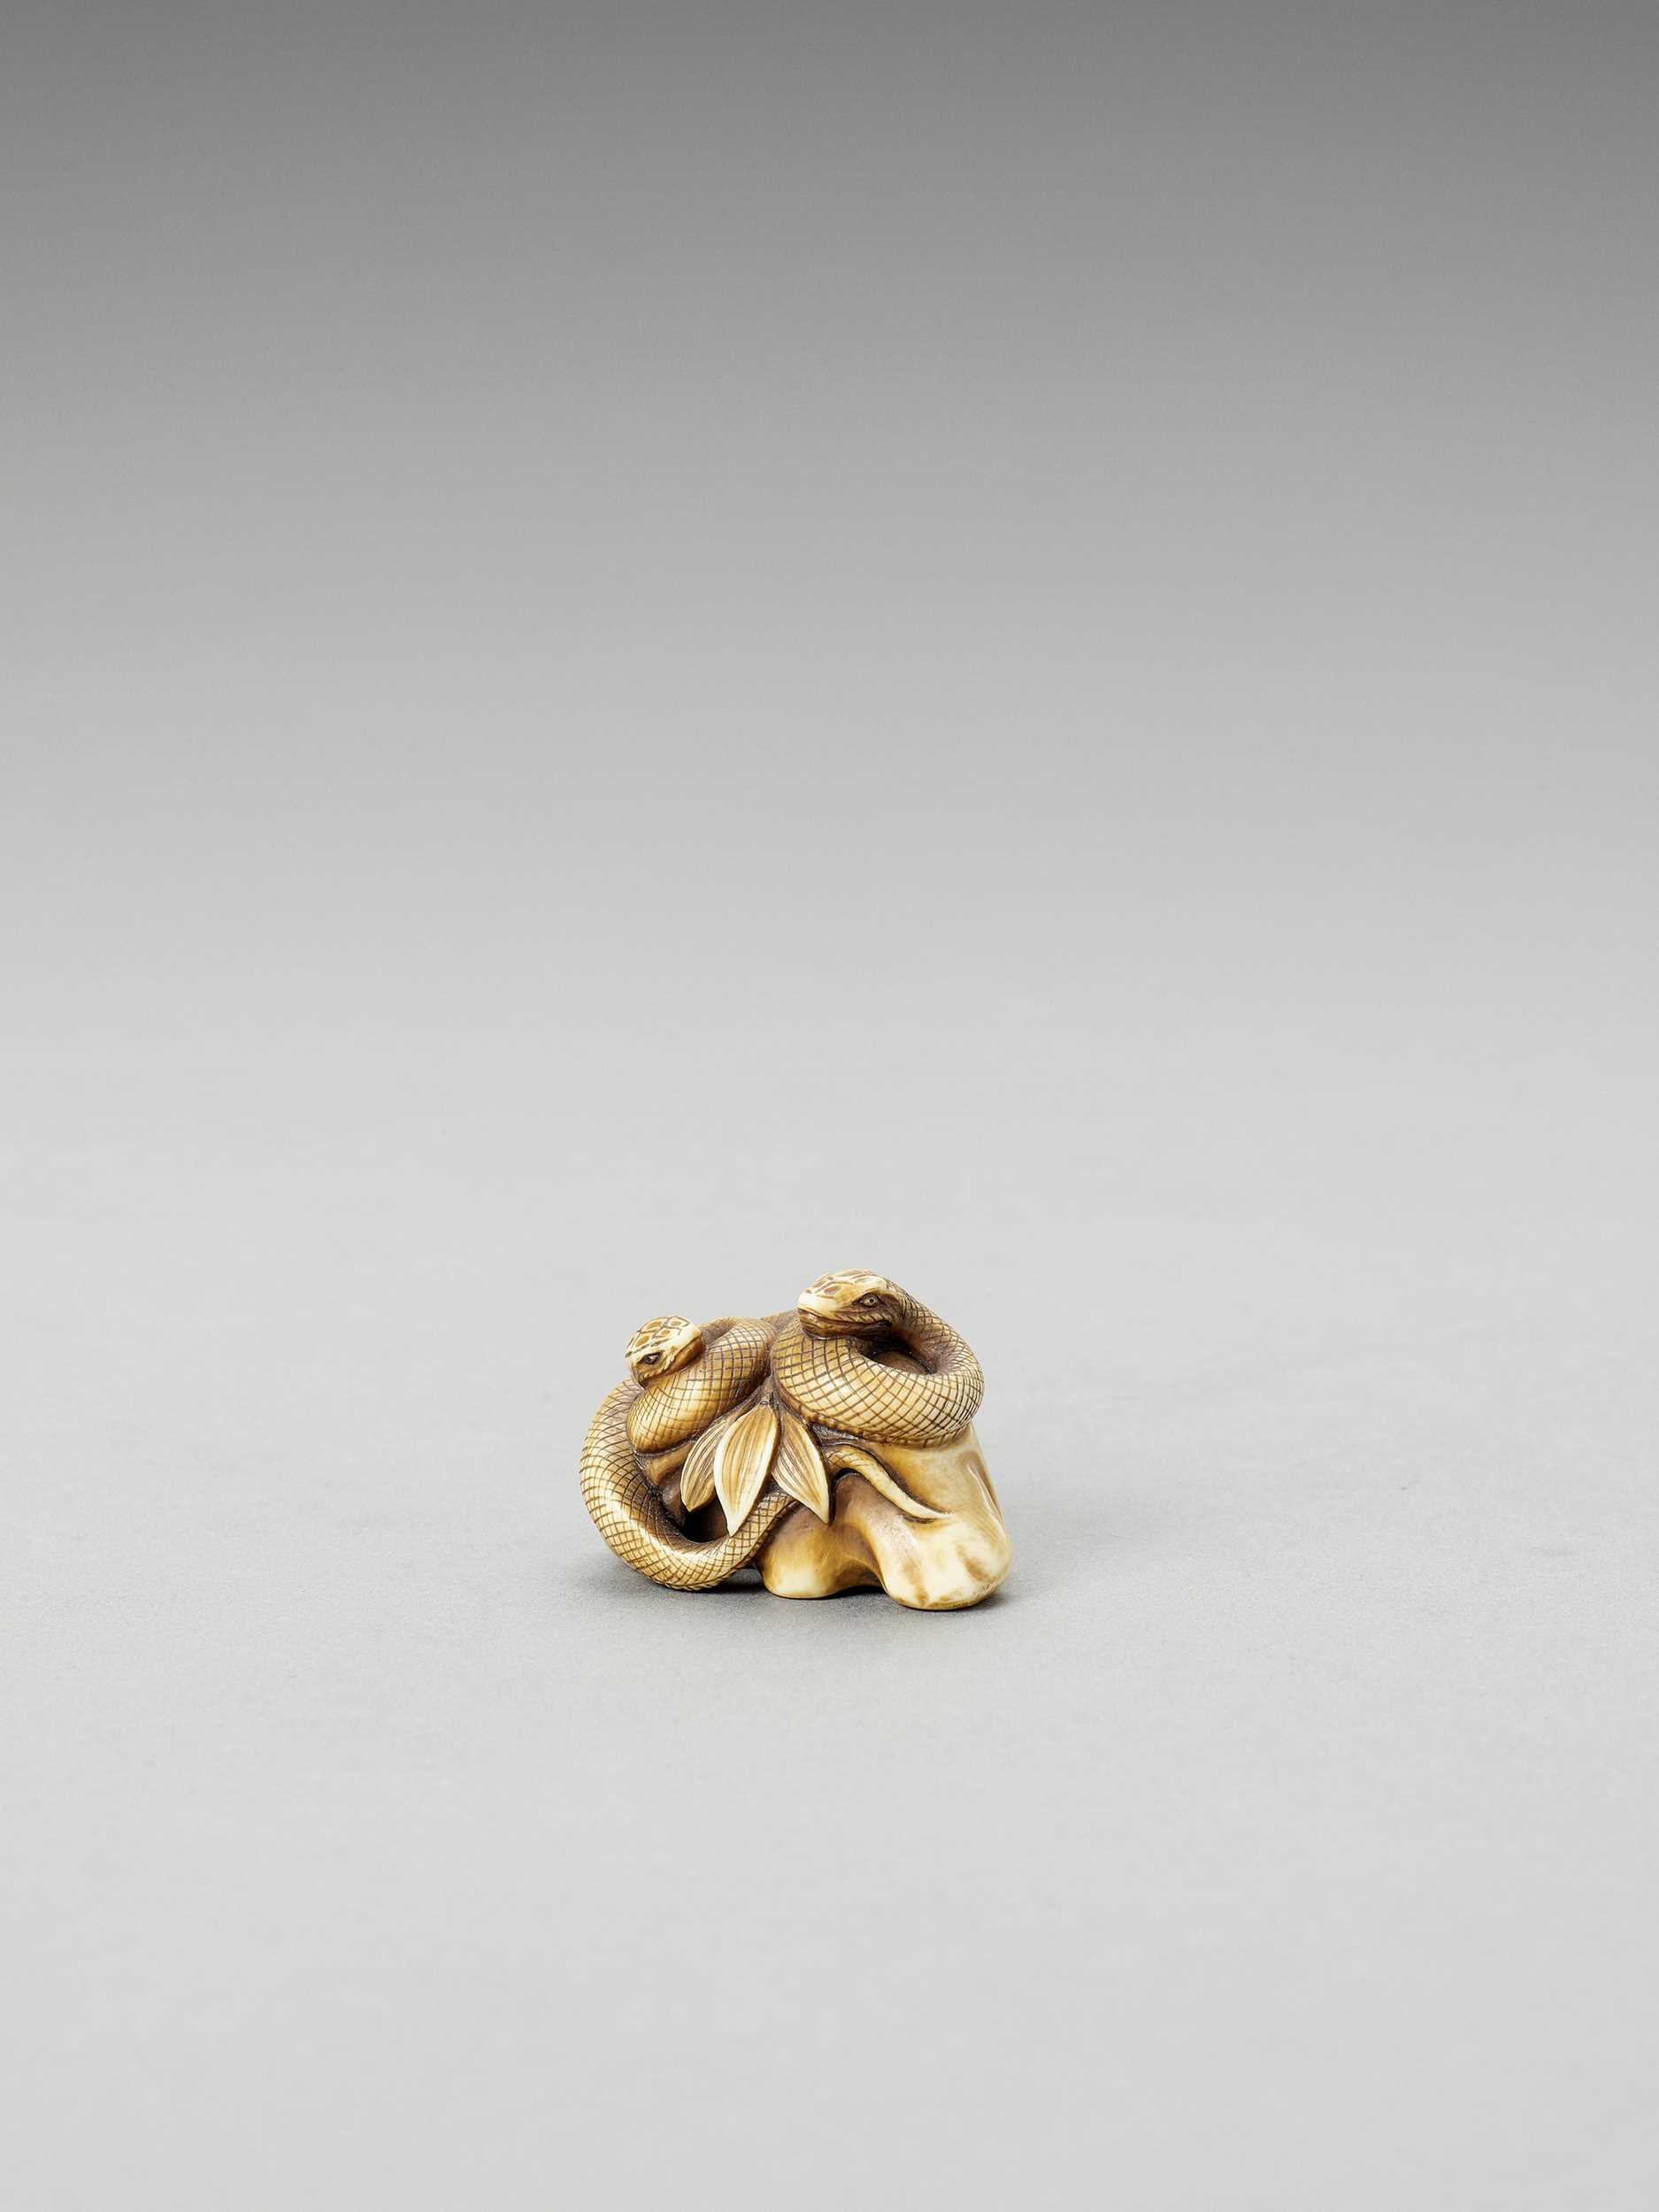 Lot 339 - MUNEMITSU: AN IVORY NETSUKE OF TWO COILED SNAKES